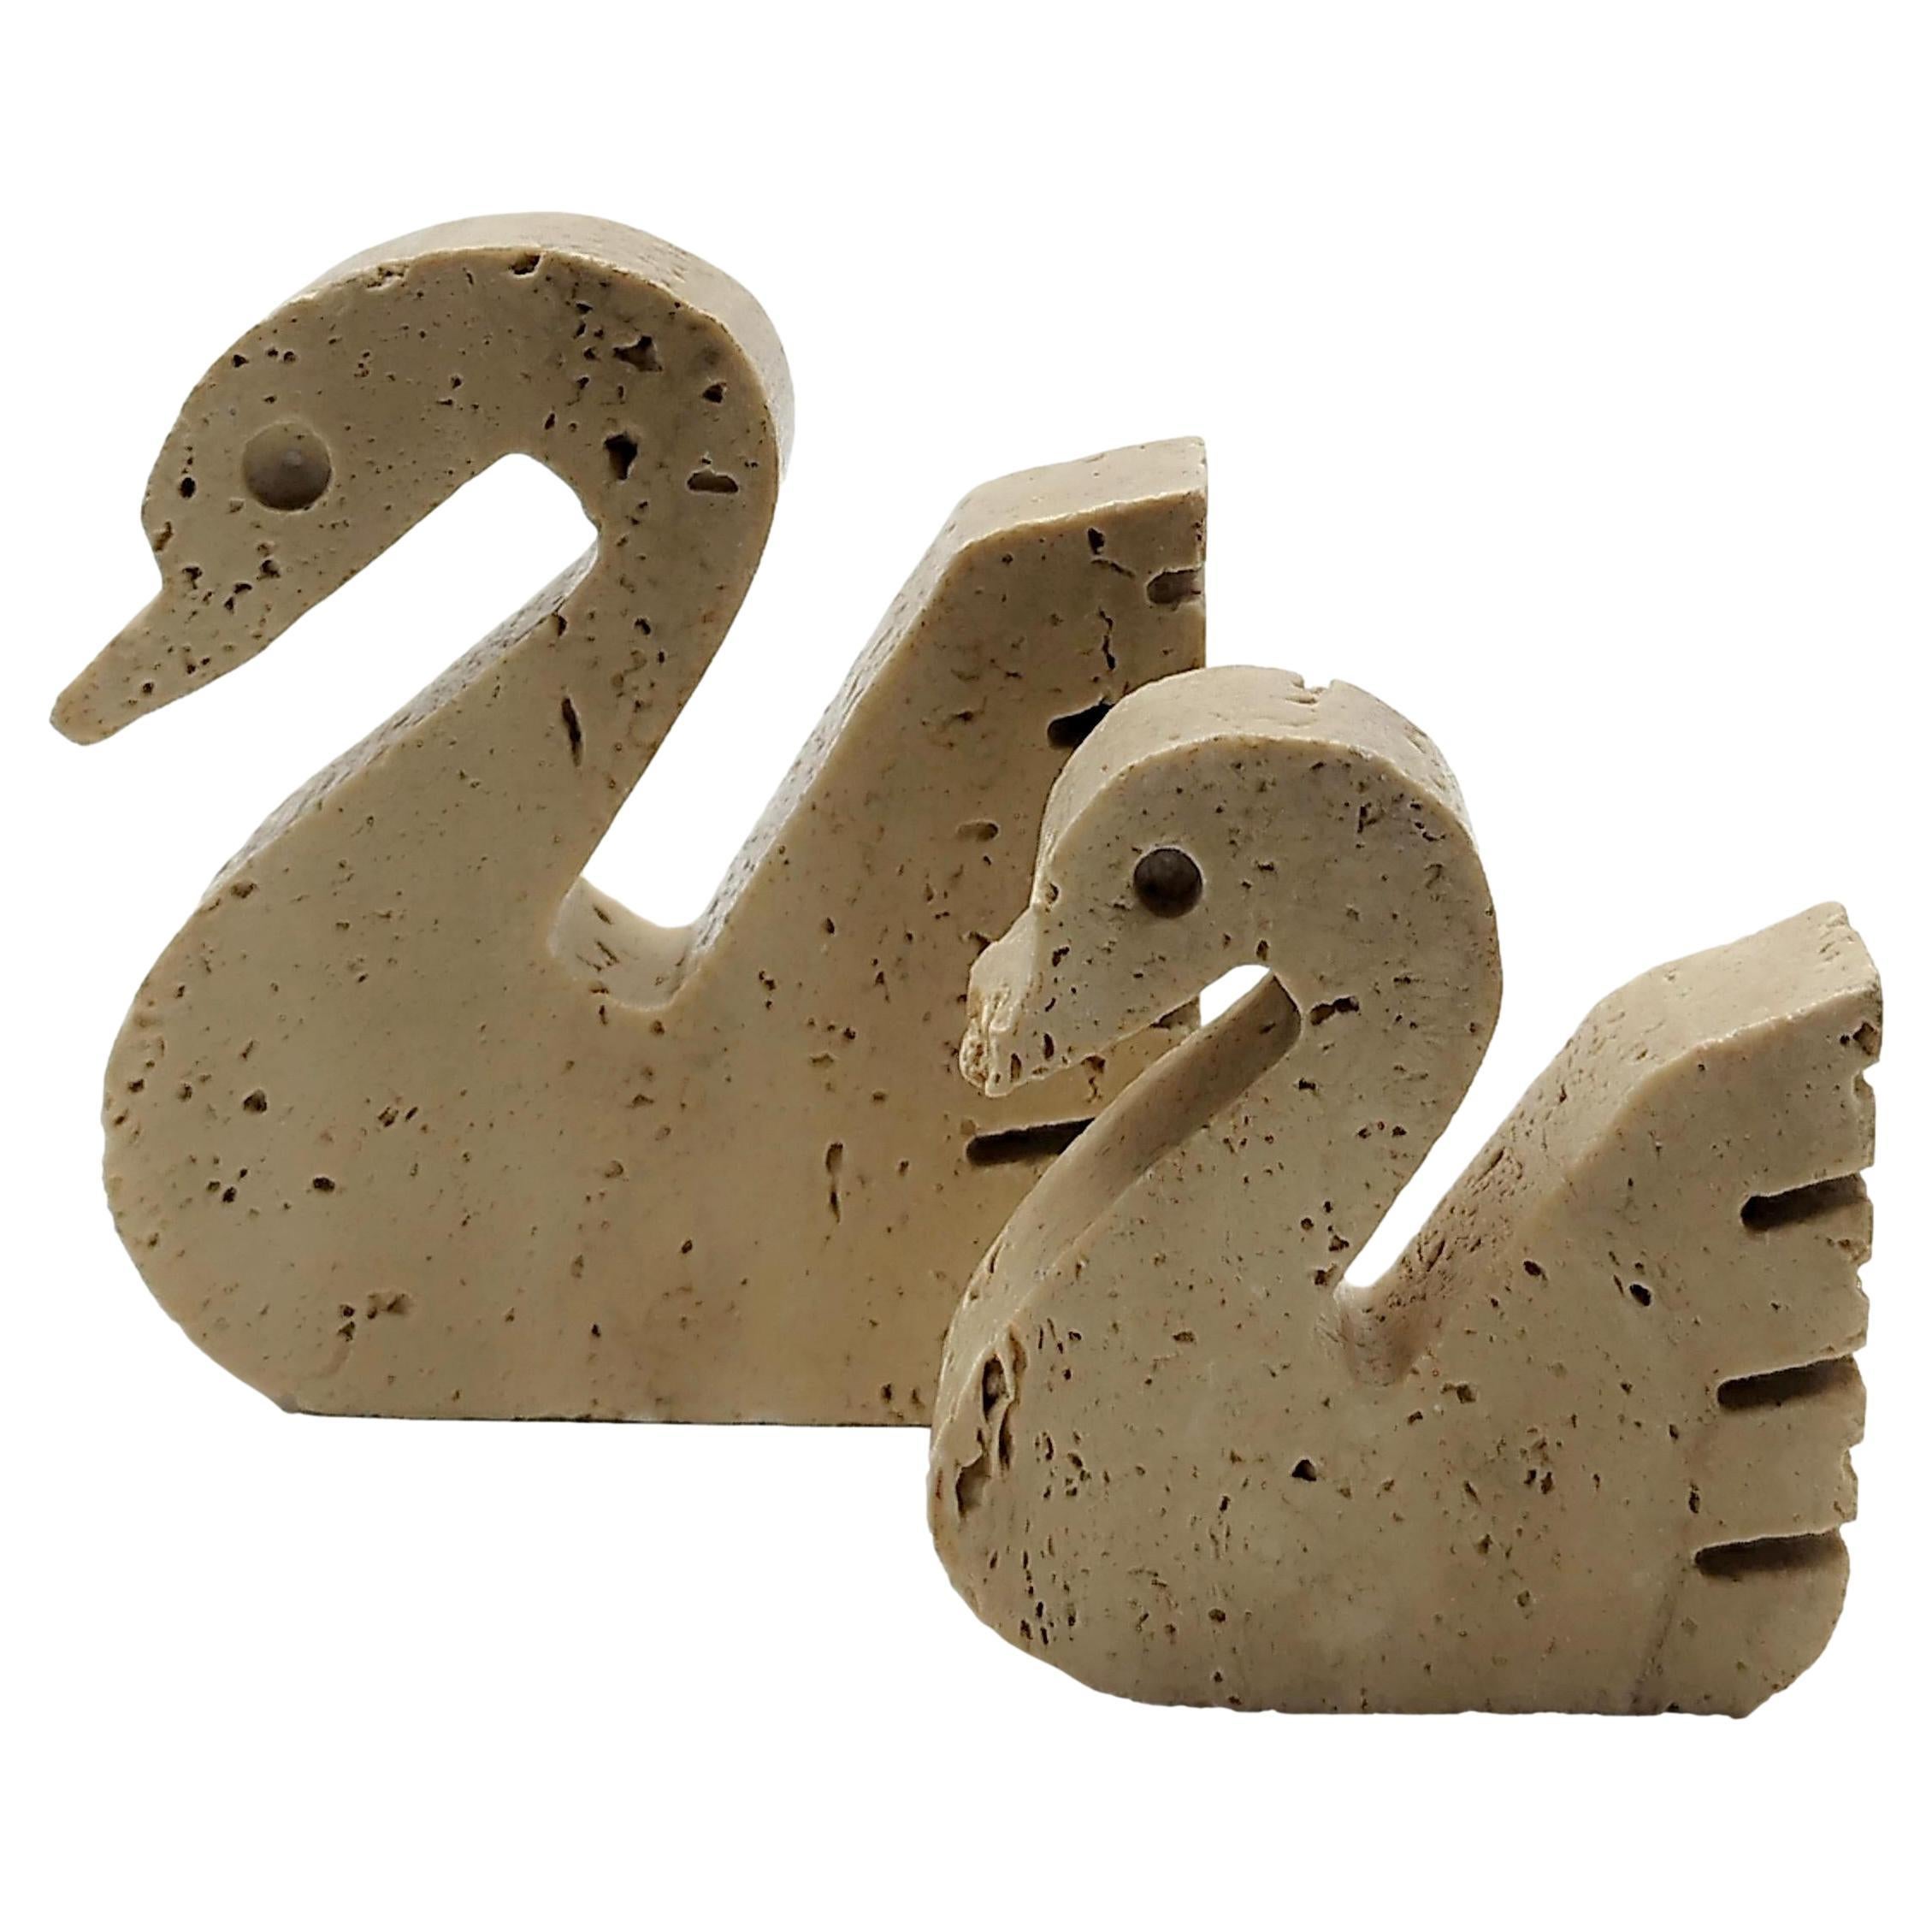 Enzo Mari for F.lli Mannelli Pair of Travertine Marble Swans, Italy 1970s